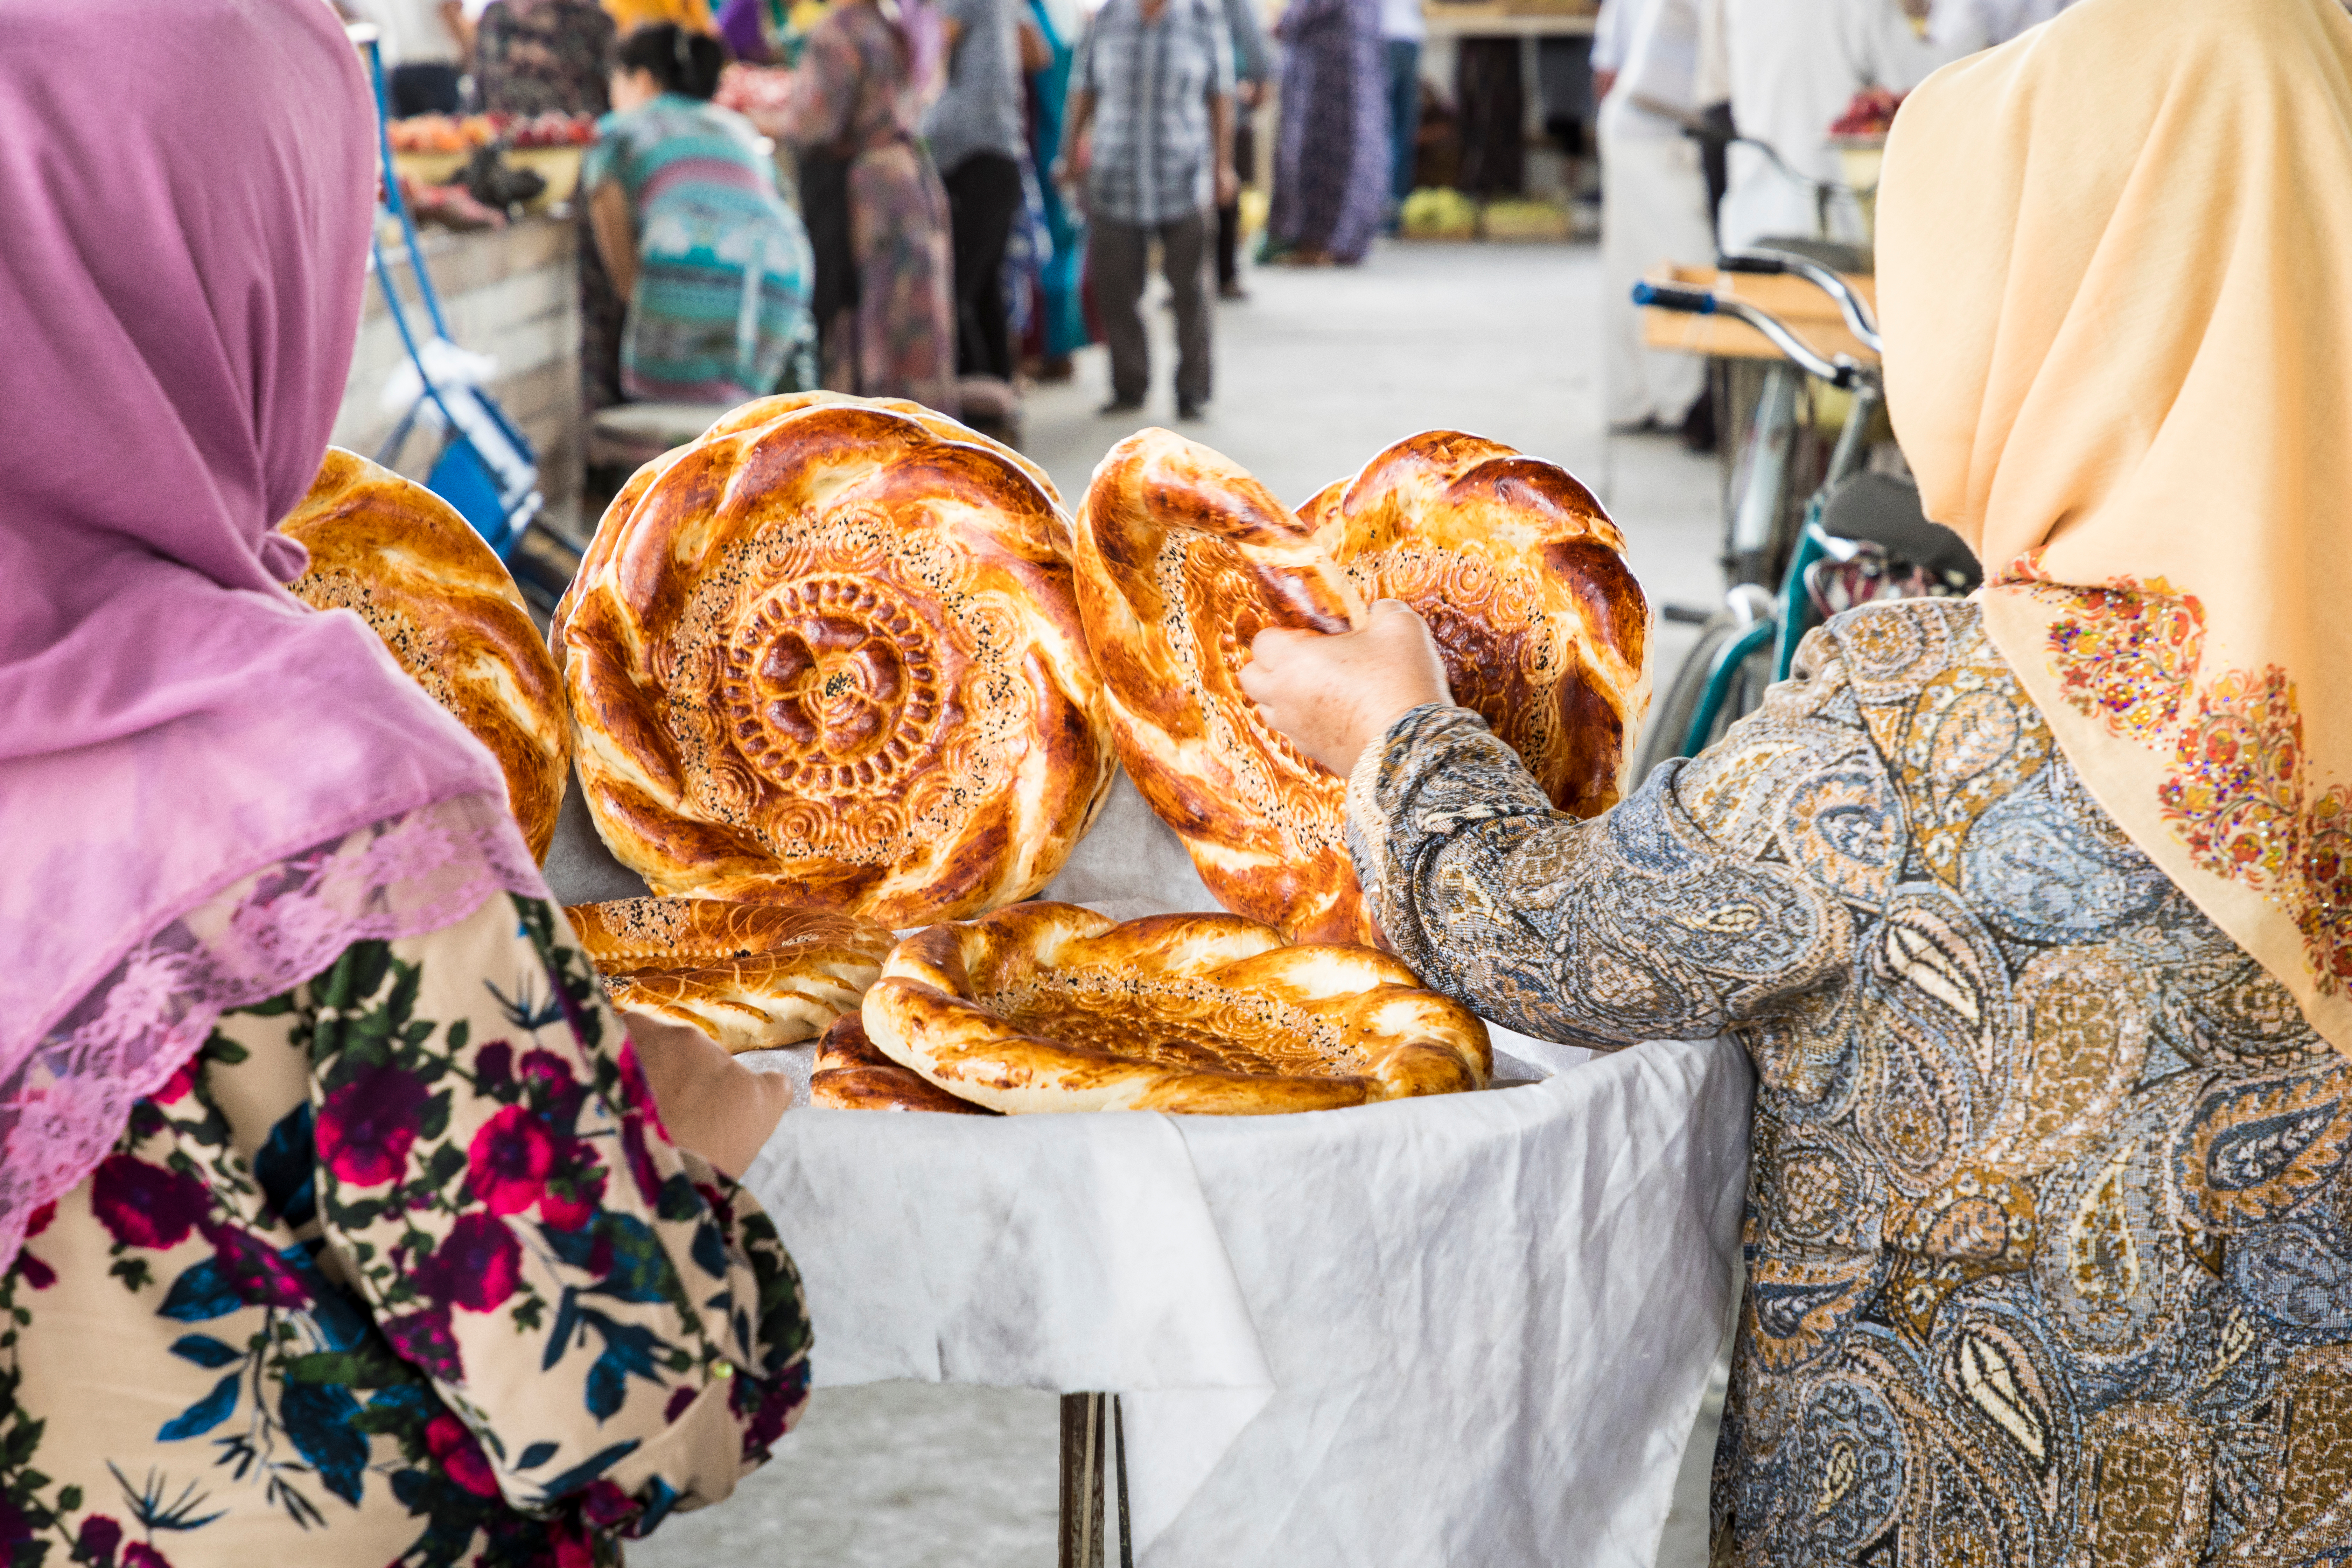 Women buying traditional bread